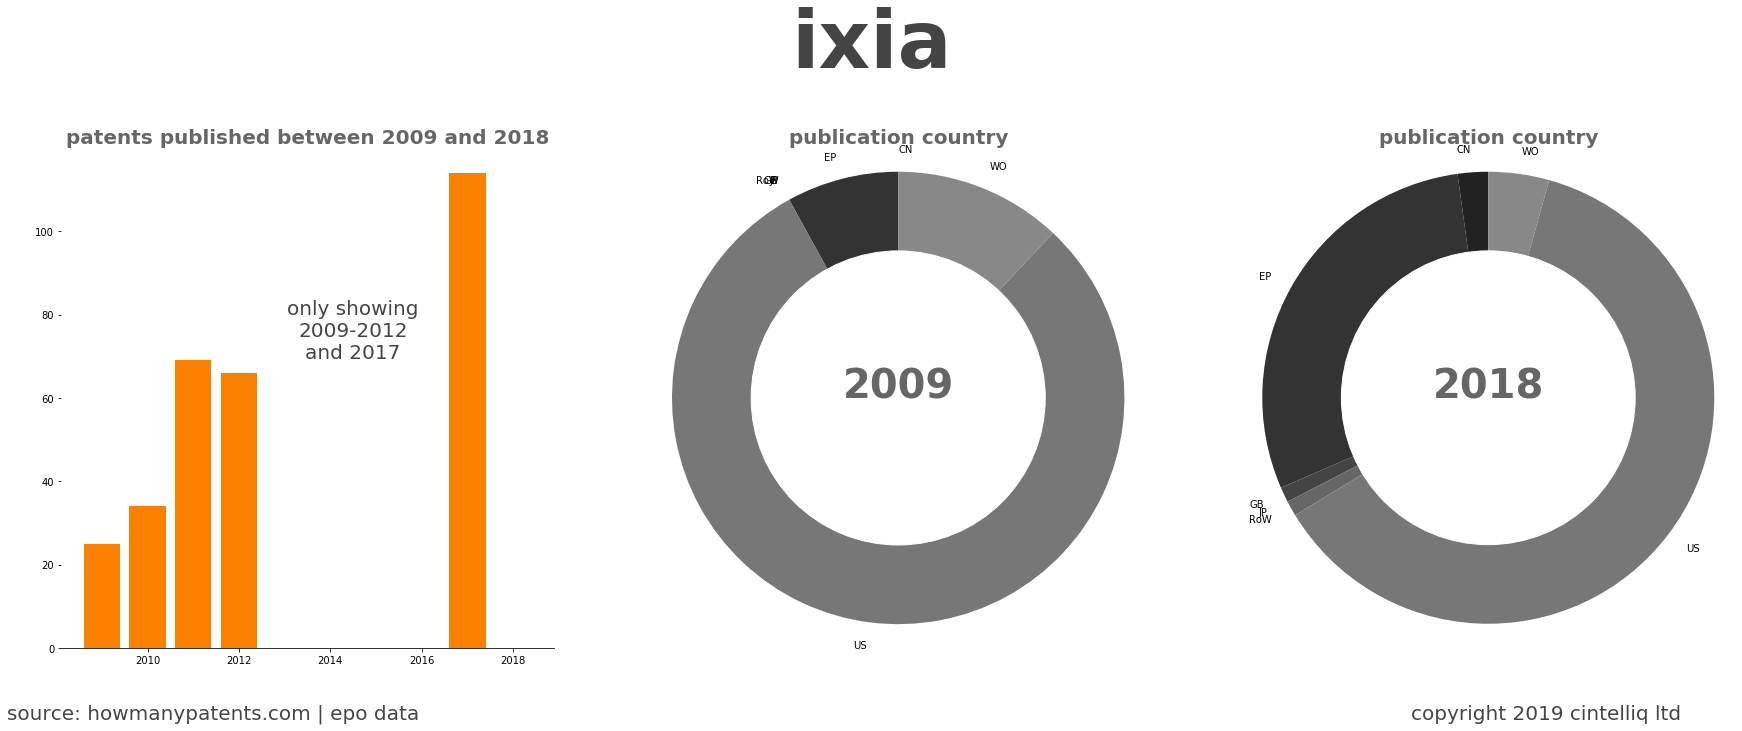 summary of patents for Ixia